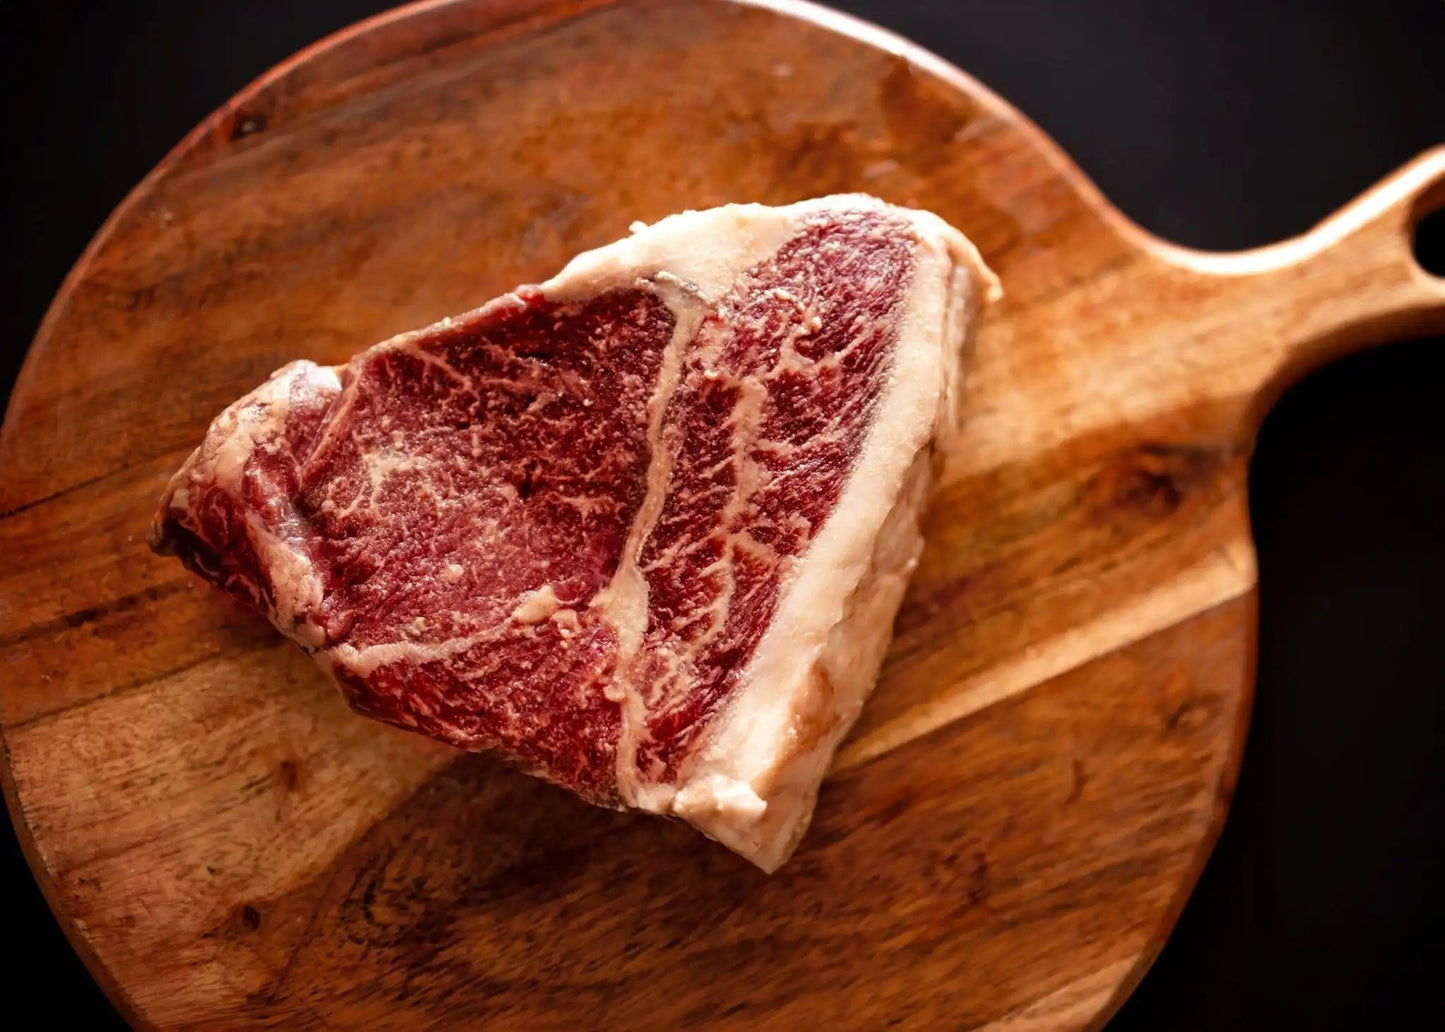 100% All-Natural Grass-Fed Pasture-Raised Wagyu Steak Lovers Beef BundThe Wagyu Steak Lovers Beef Bundle is a perfect choice for those who appreciate the exquisite taste and tenderness of premium Wagyu beef. This bundle features a sele100%The Hufeisen-Ranch (WYO Wagyu)